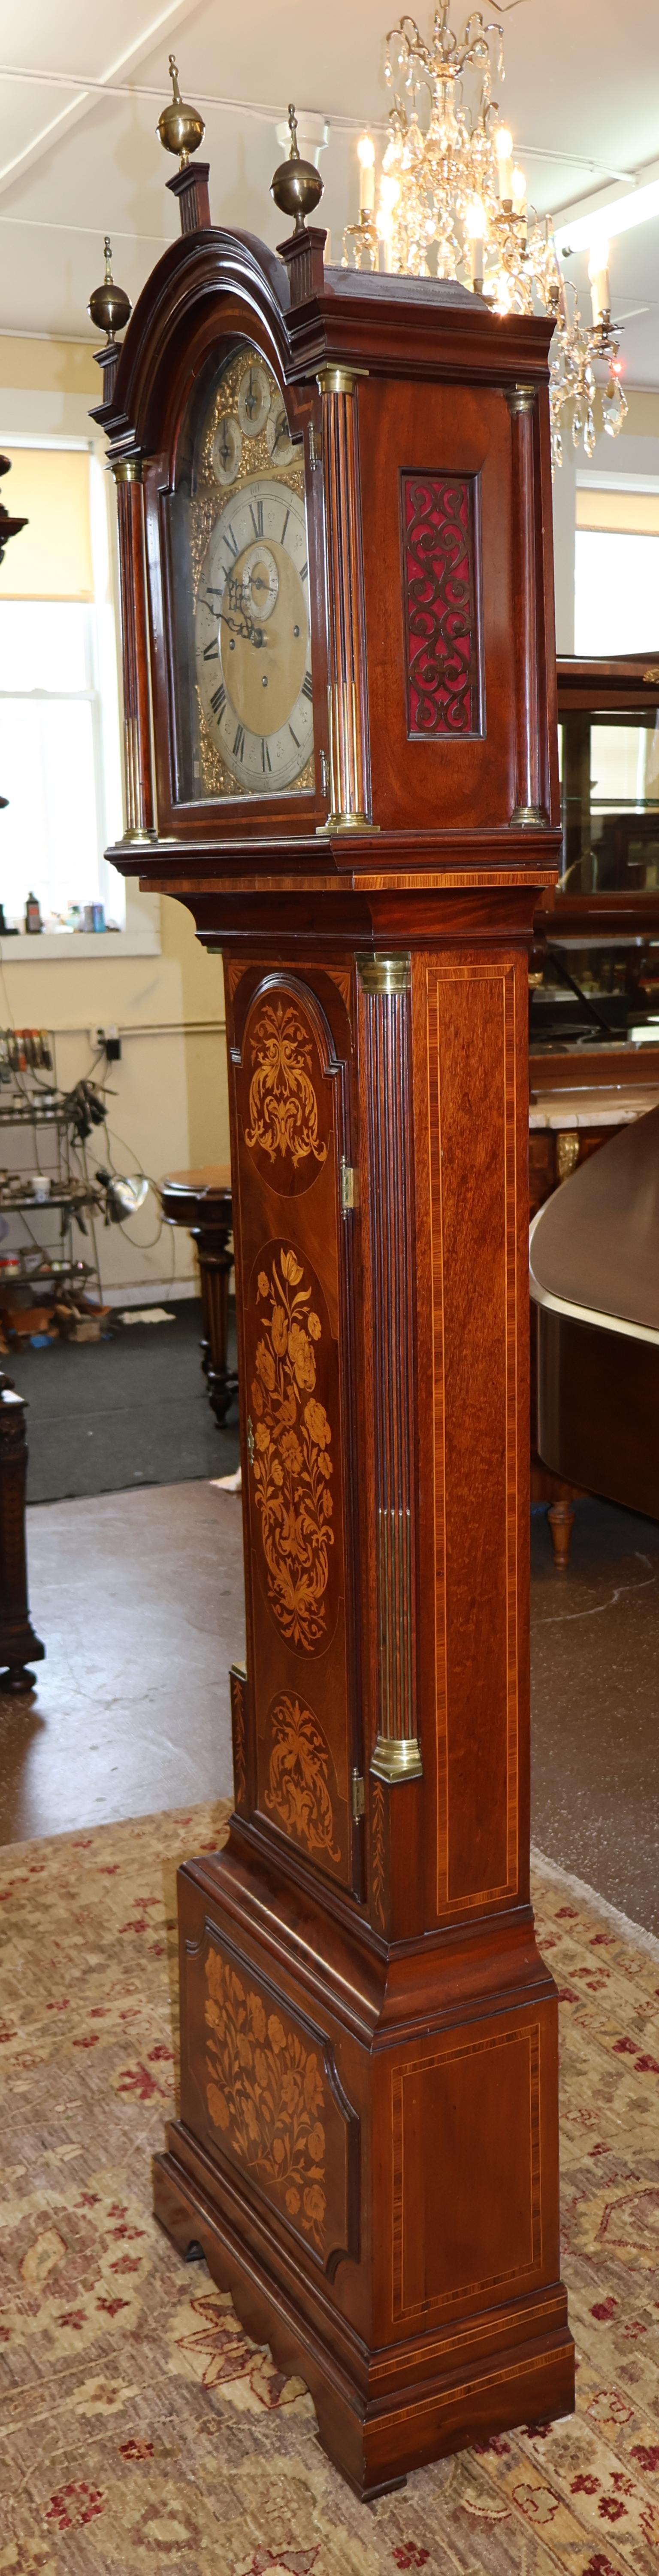 Herbert Blockley London Musical 19th Century Inlaid Tall Case Grandfather Clock For Sale 2